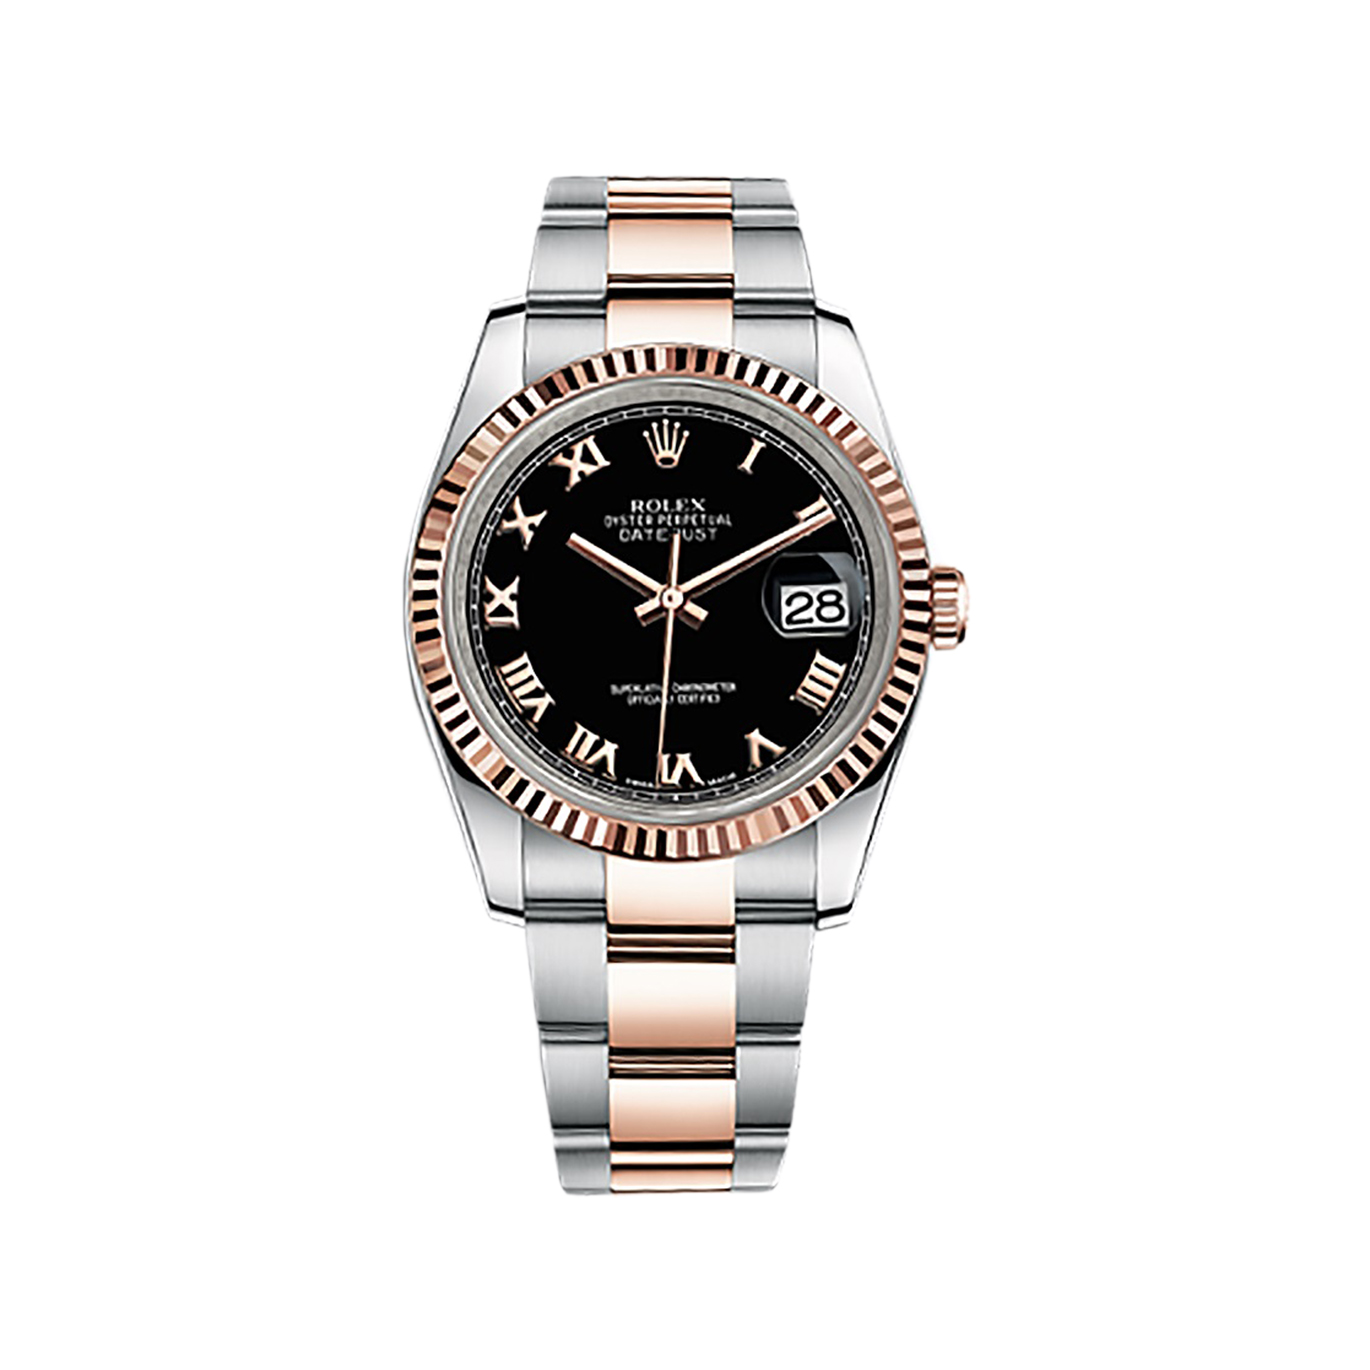 Datejust 36 116231 Rose Gold & Stainless Steel Watch (Black)